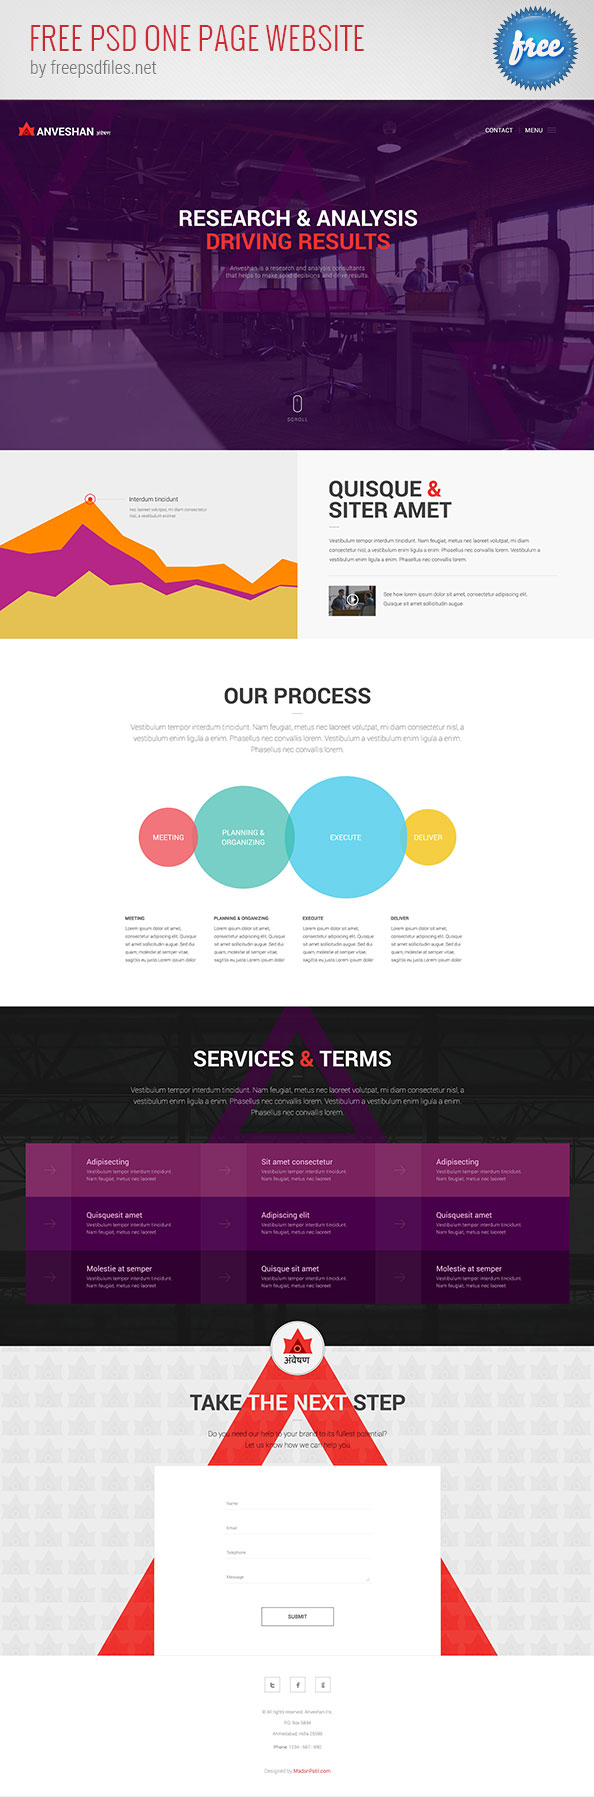 Free PSD One Page Website